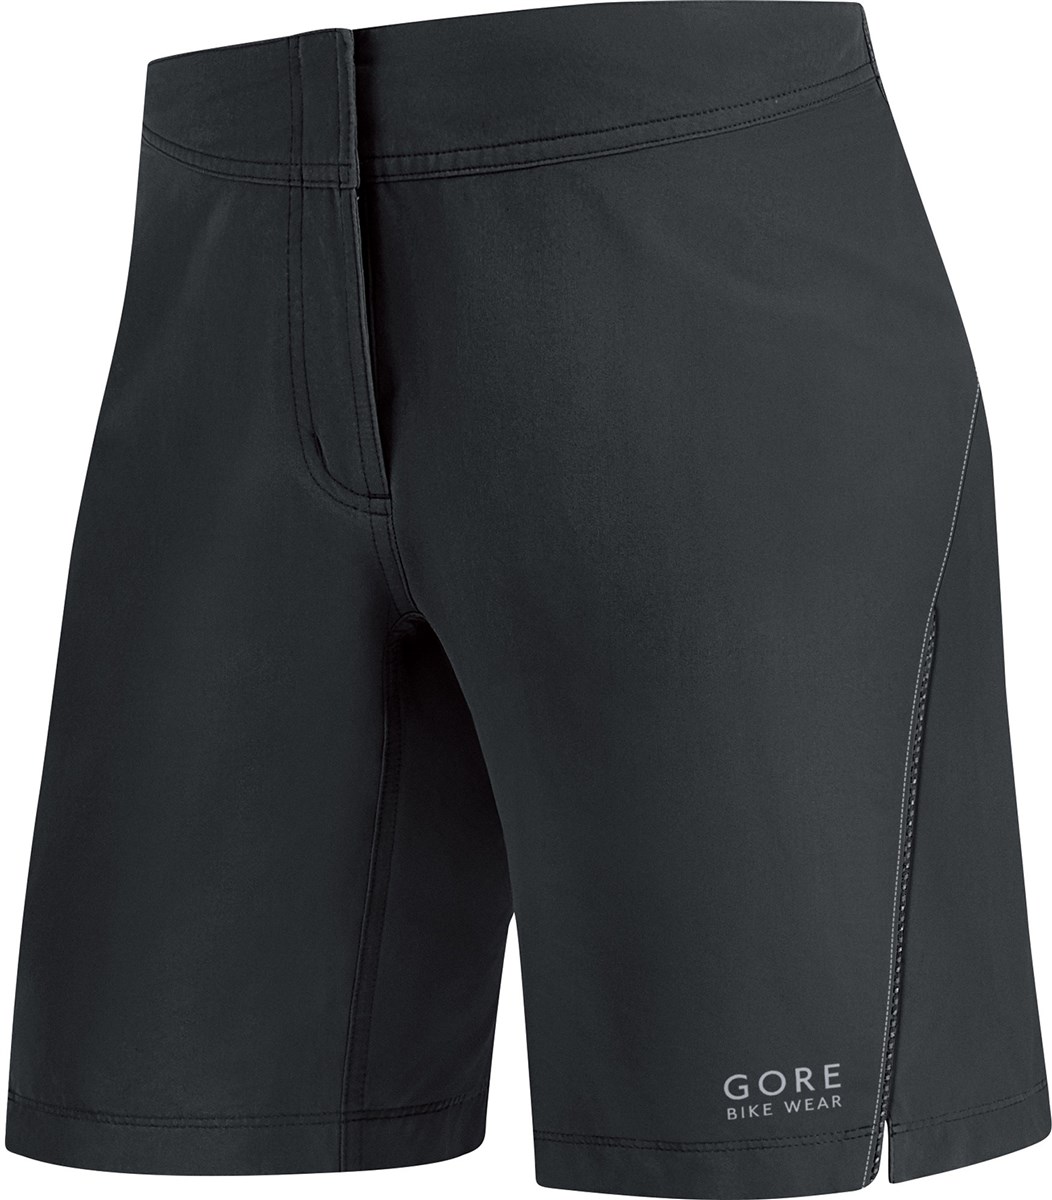 Gore E Womens Shorts AW17 product image